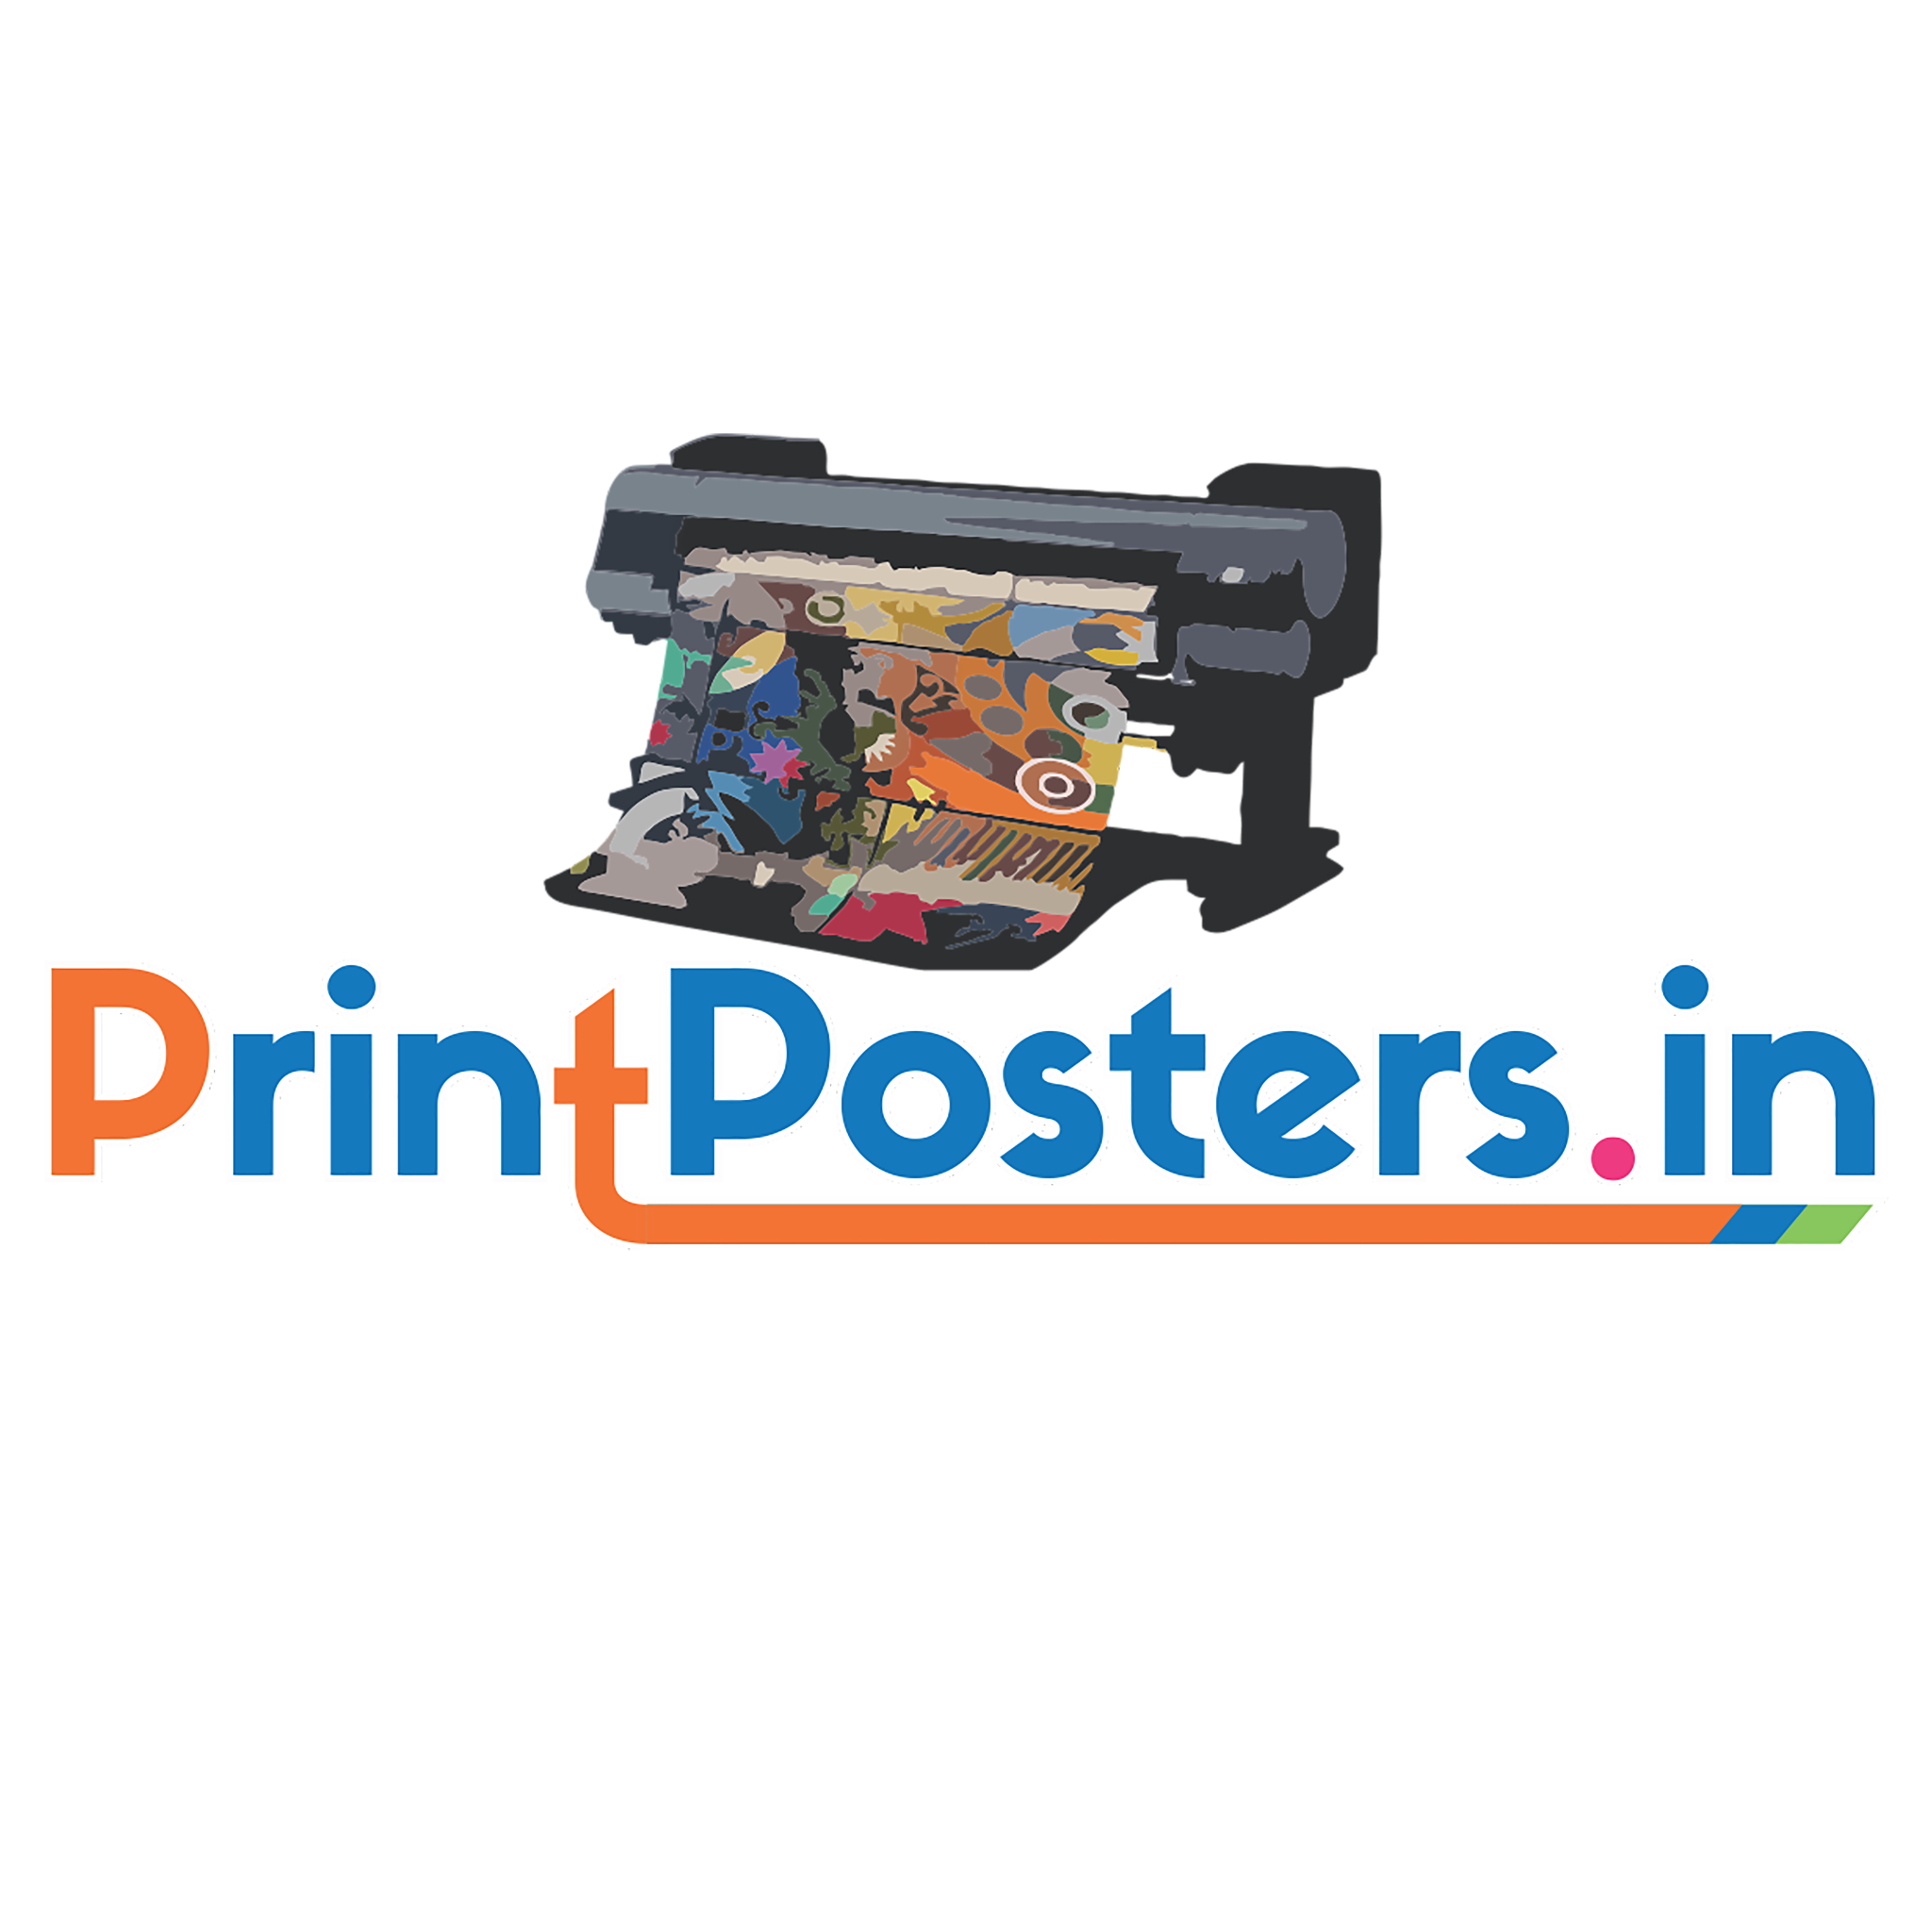 Printposters review on another site